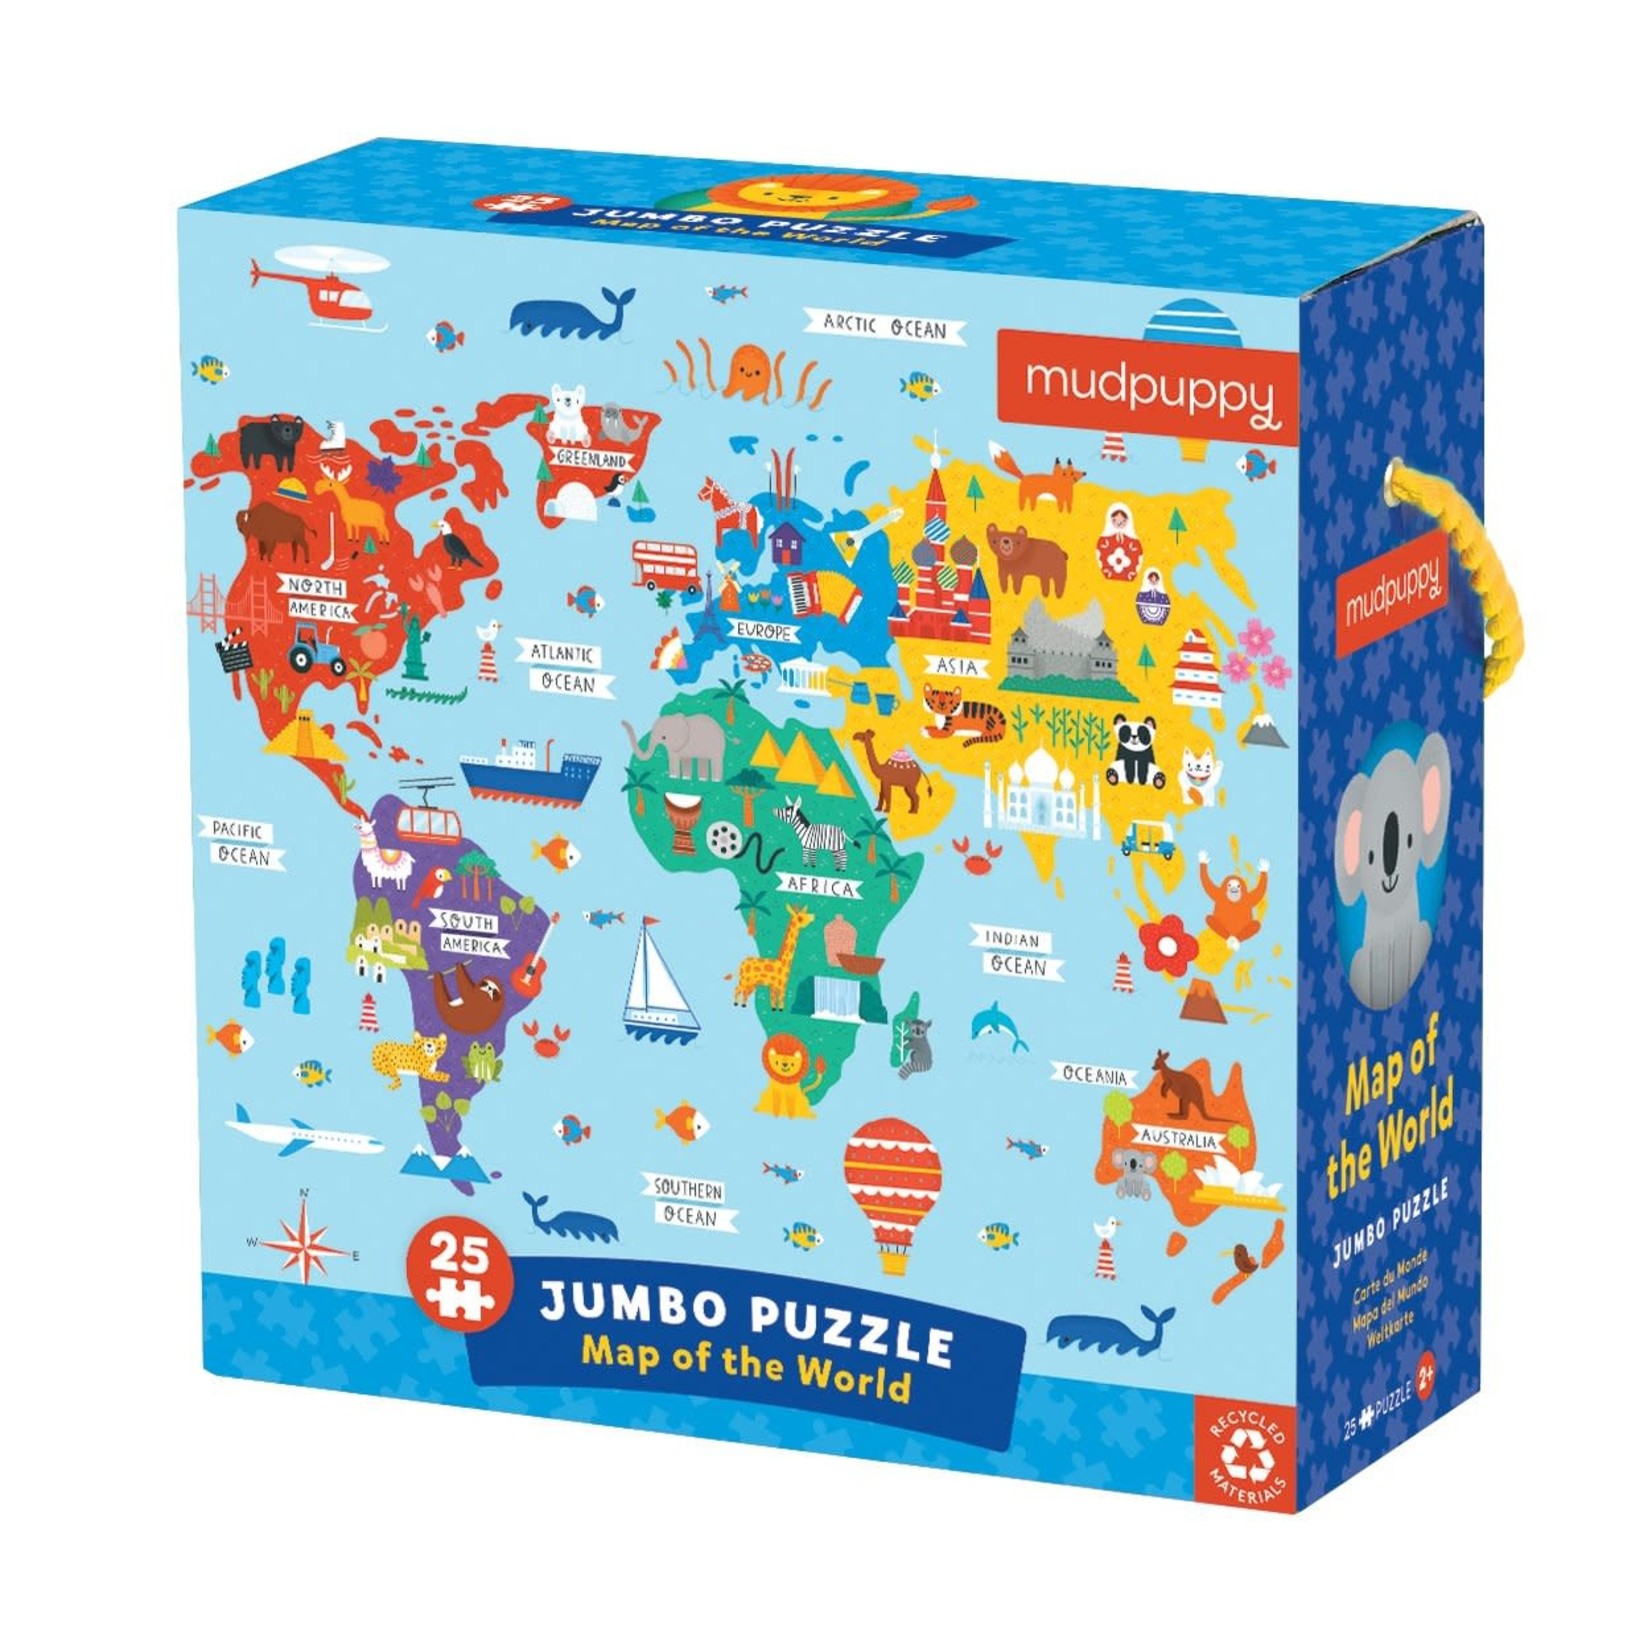 Mudpuppy Jumbo Puzzle - Map of the World 25 Pieces